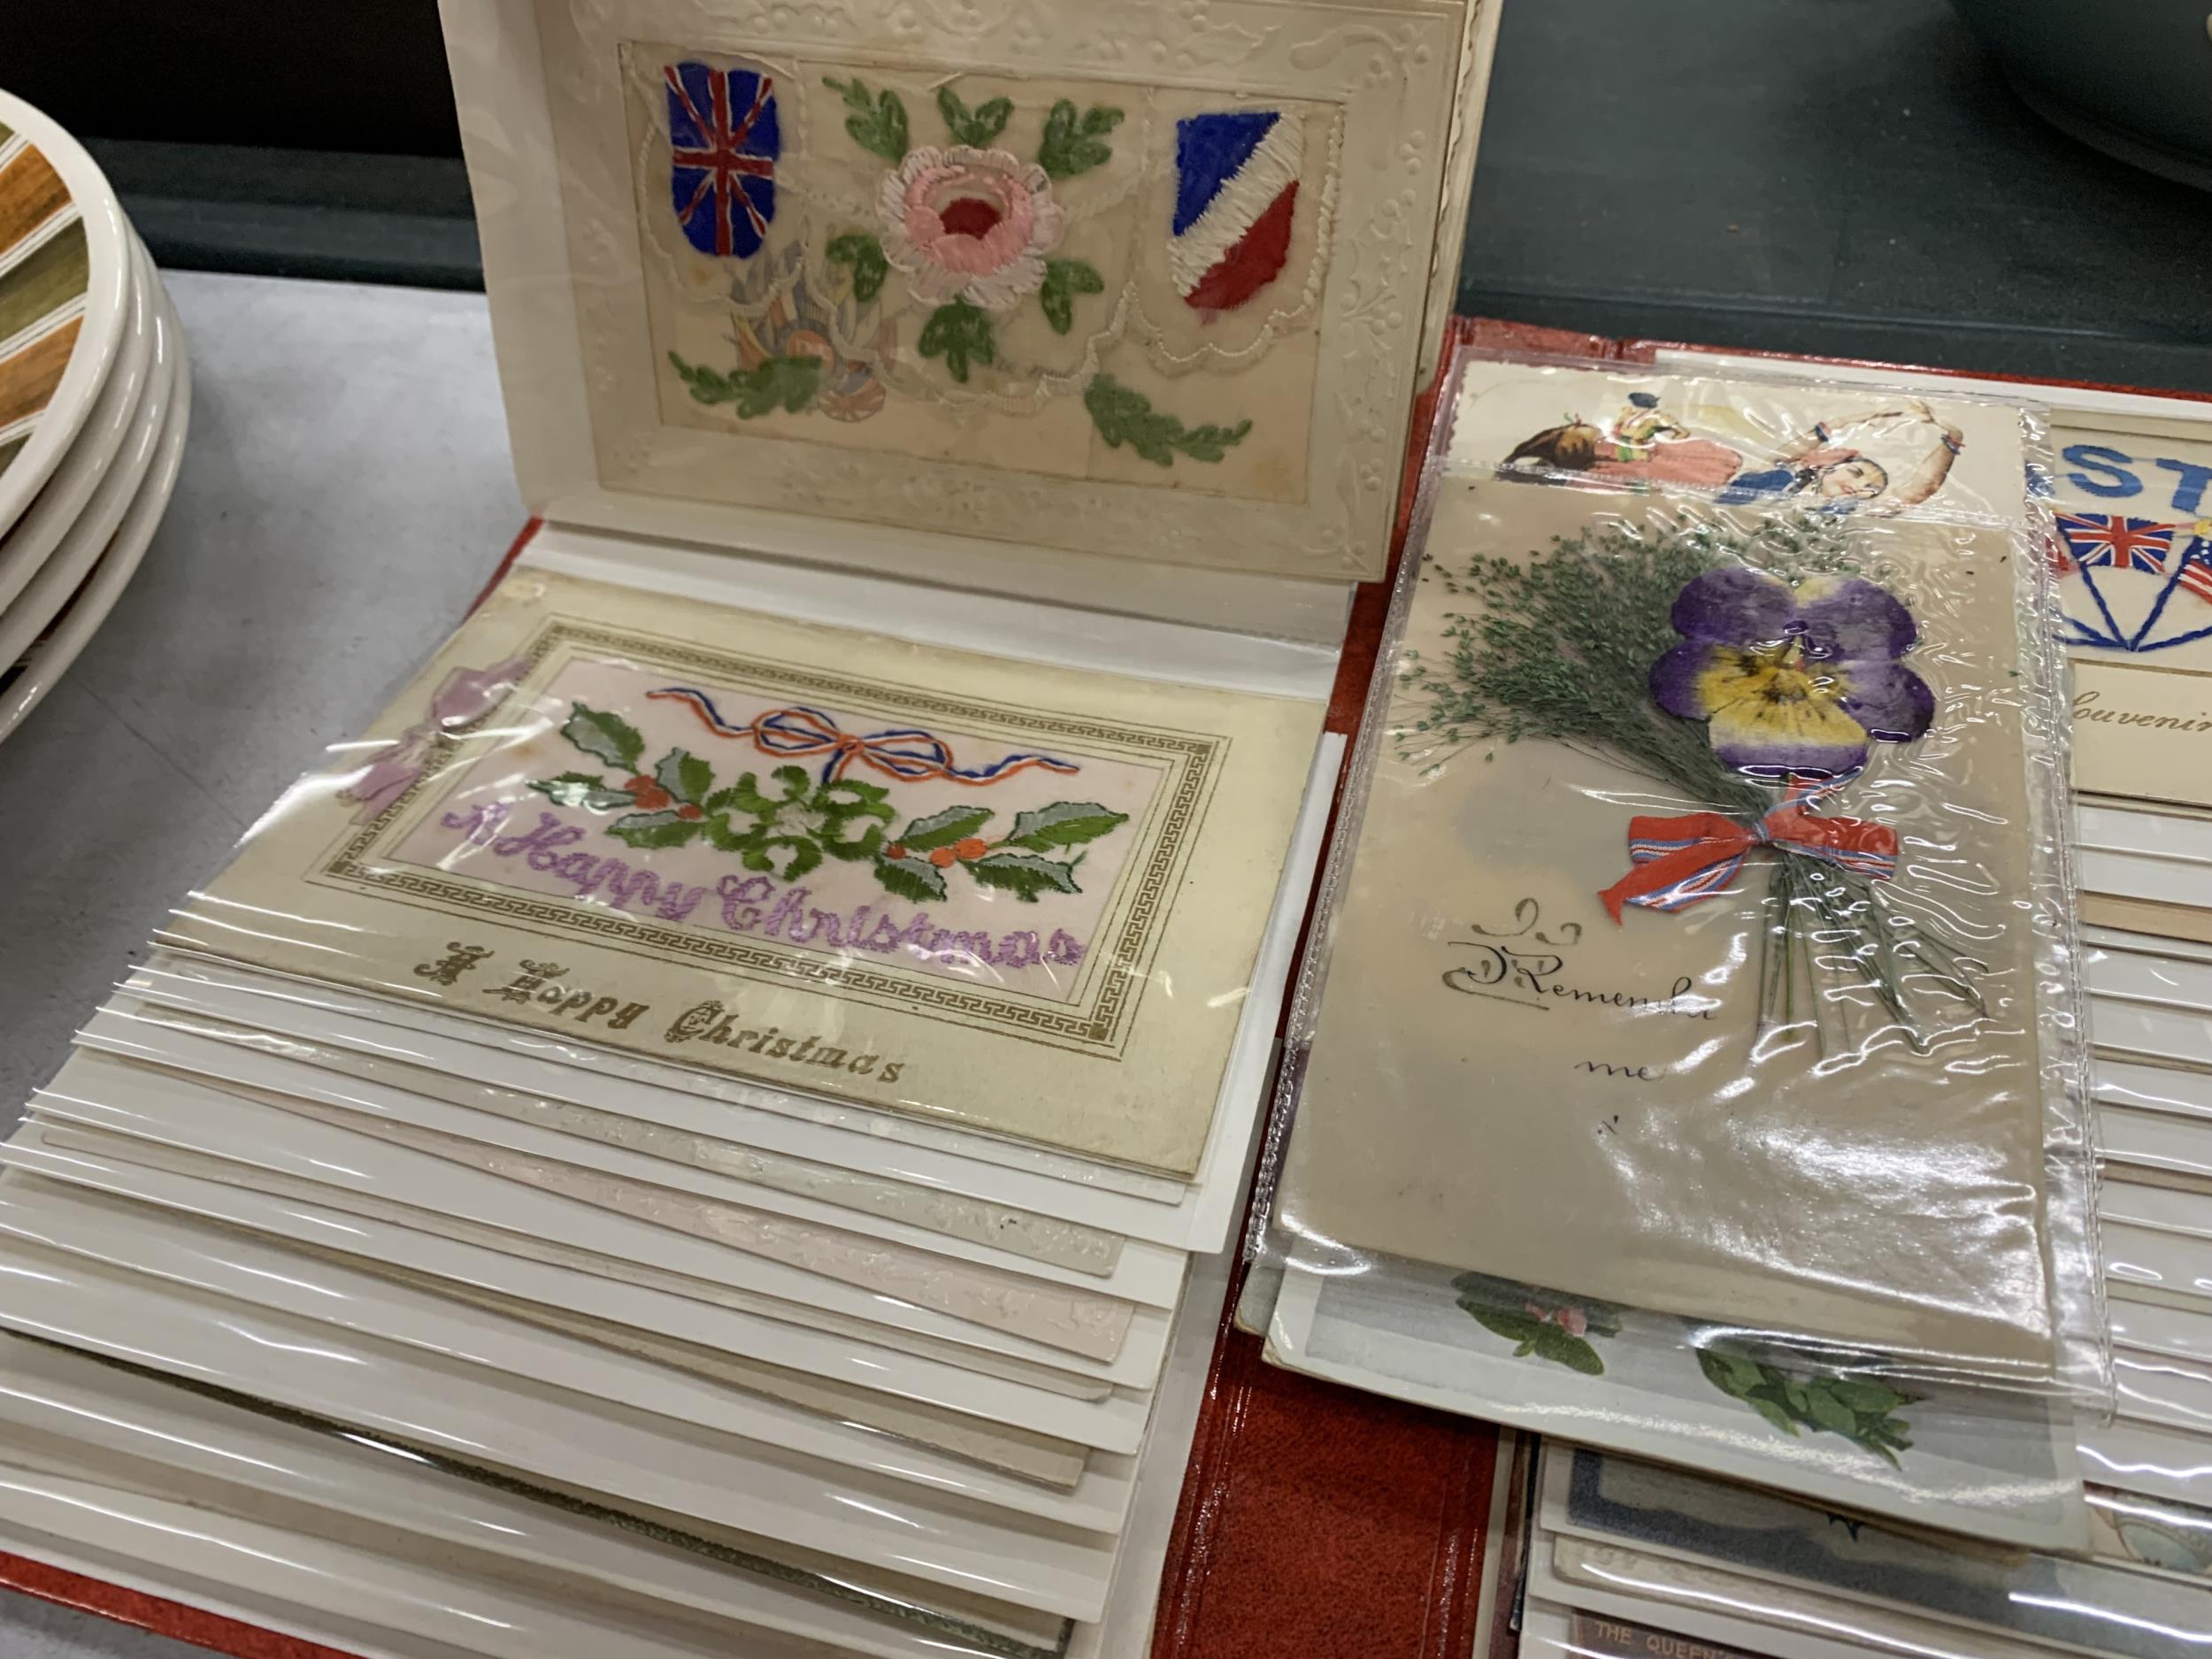 A PHOTO ALBUM CONTAINING VINTAGE POSTCARDS AND GREETINS CARDS, SOME HAND EMBROIDERED - Image 2 of 7